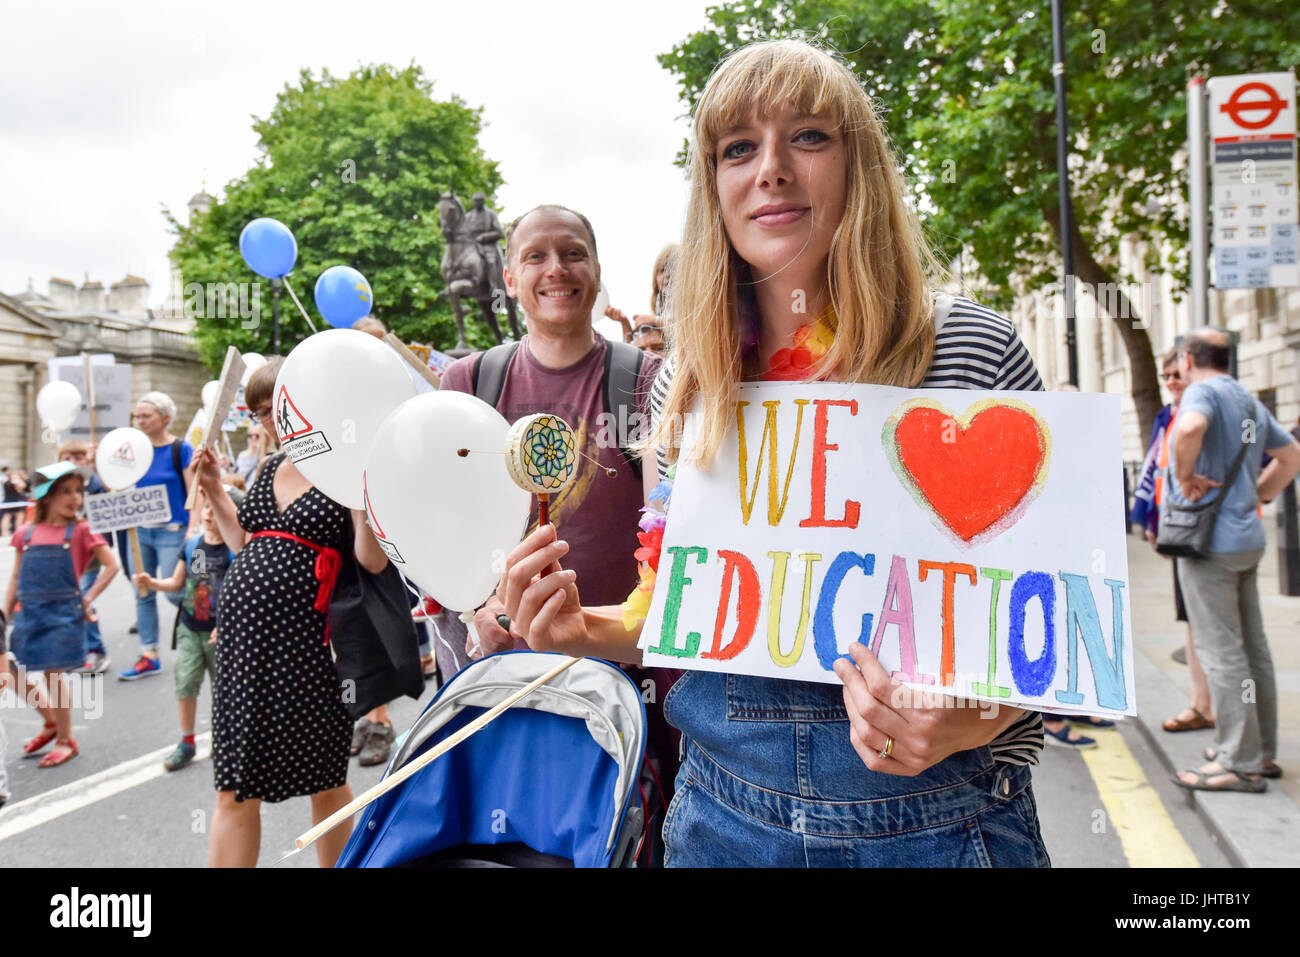 London, UK.  16 July 2017.  Parents, pupils and teachers gather for an event called 'Carnival Against The Cuts' marching to Parliament Square.  The demonstration, organised by Fair Funding For Schools, a parent led campaign, calls for the government to increase funding for schools.   Credit: Stephen Chung / Alamy Live News Stock Photo